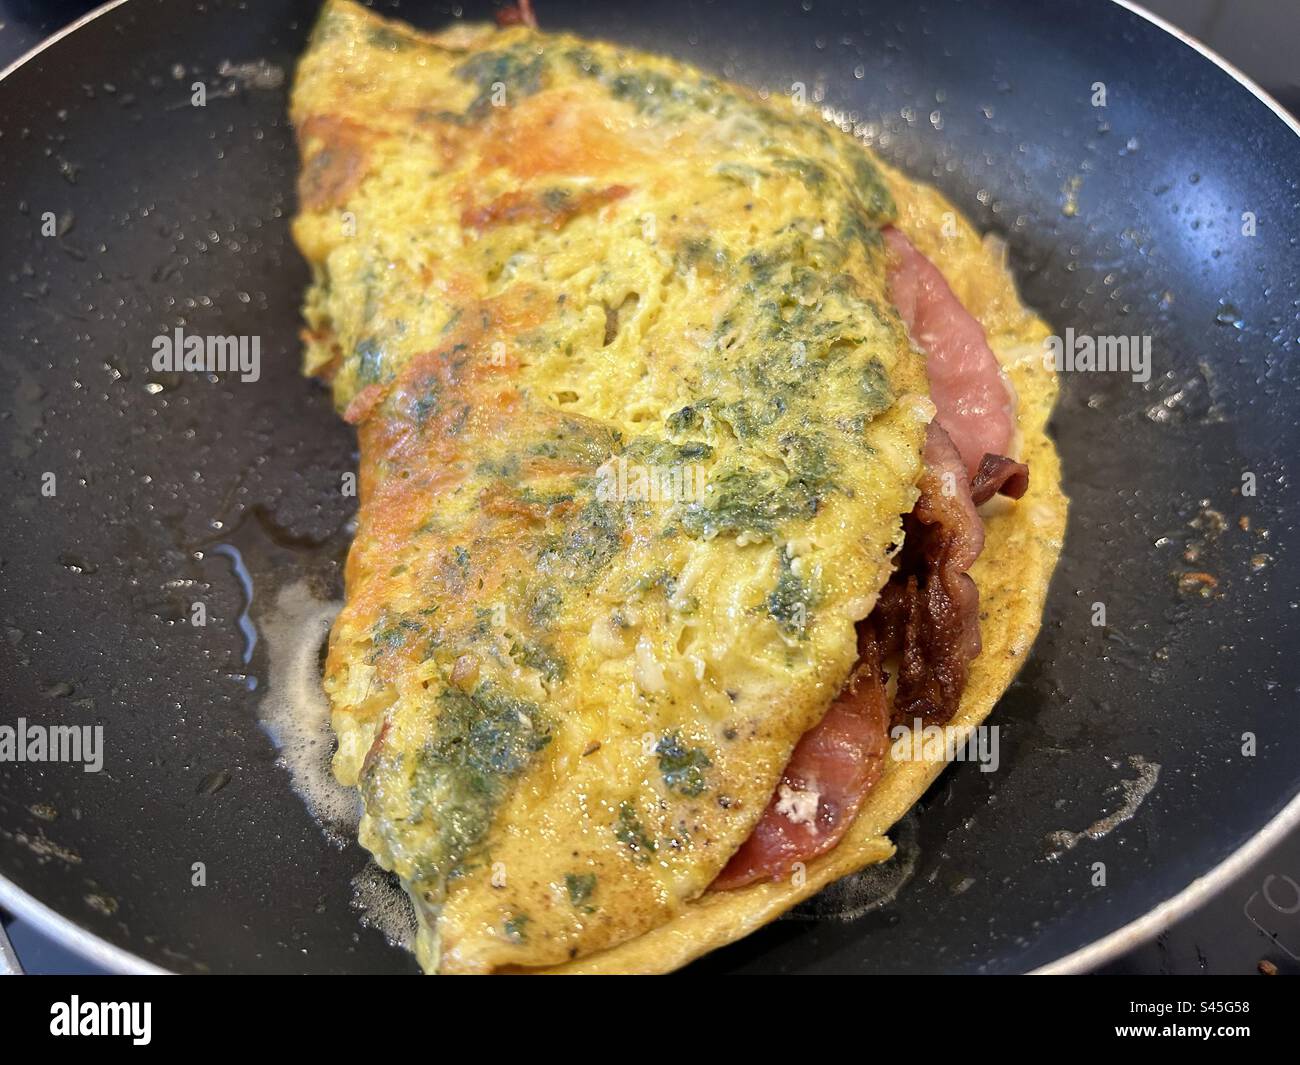 Omelette with herbs and cheese, stuffed with crispy bacon. Stock Photo